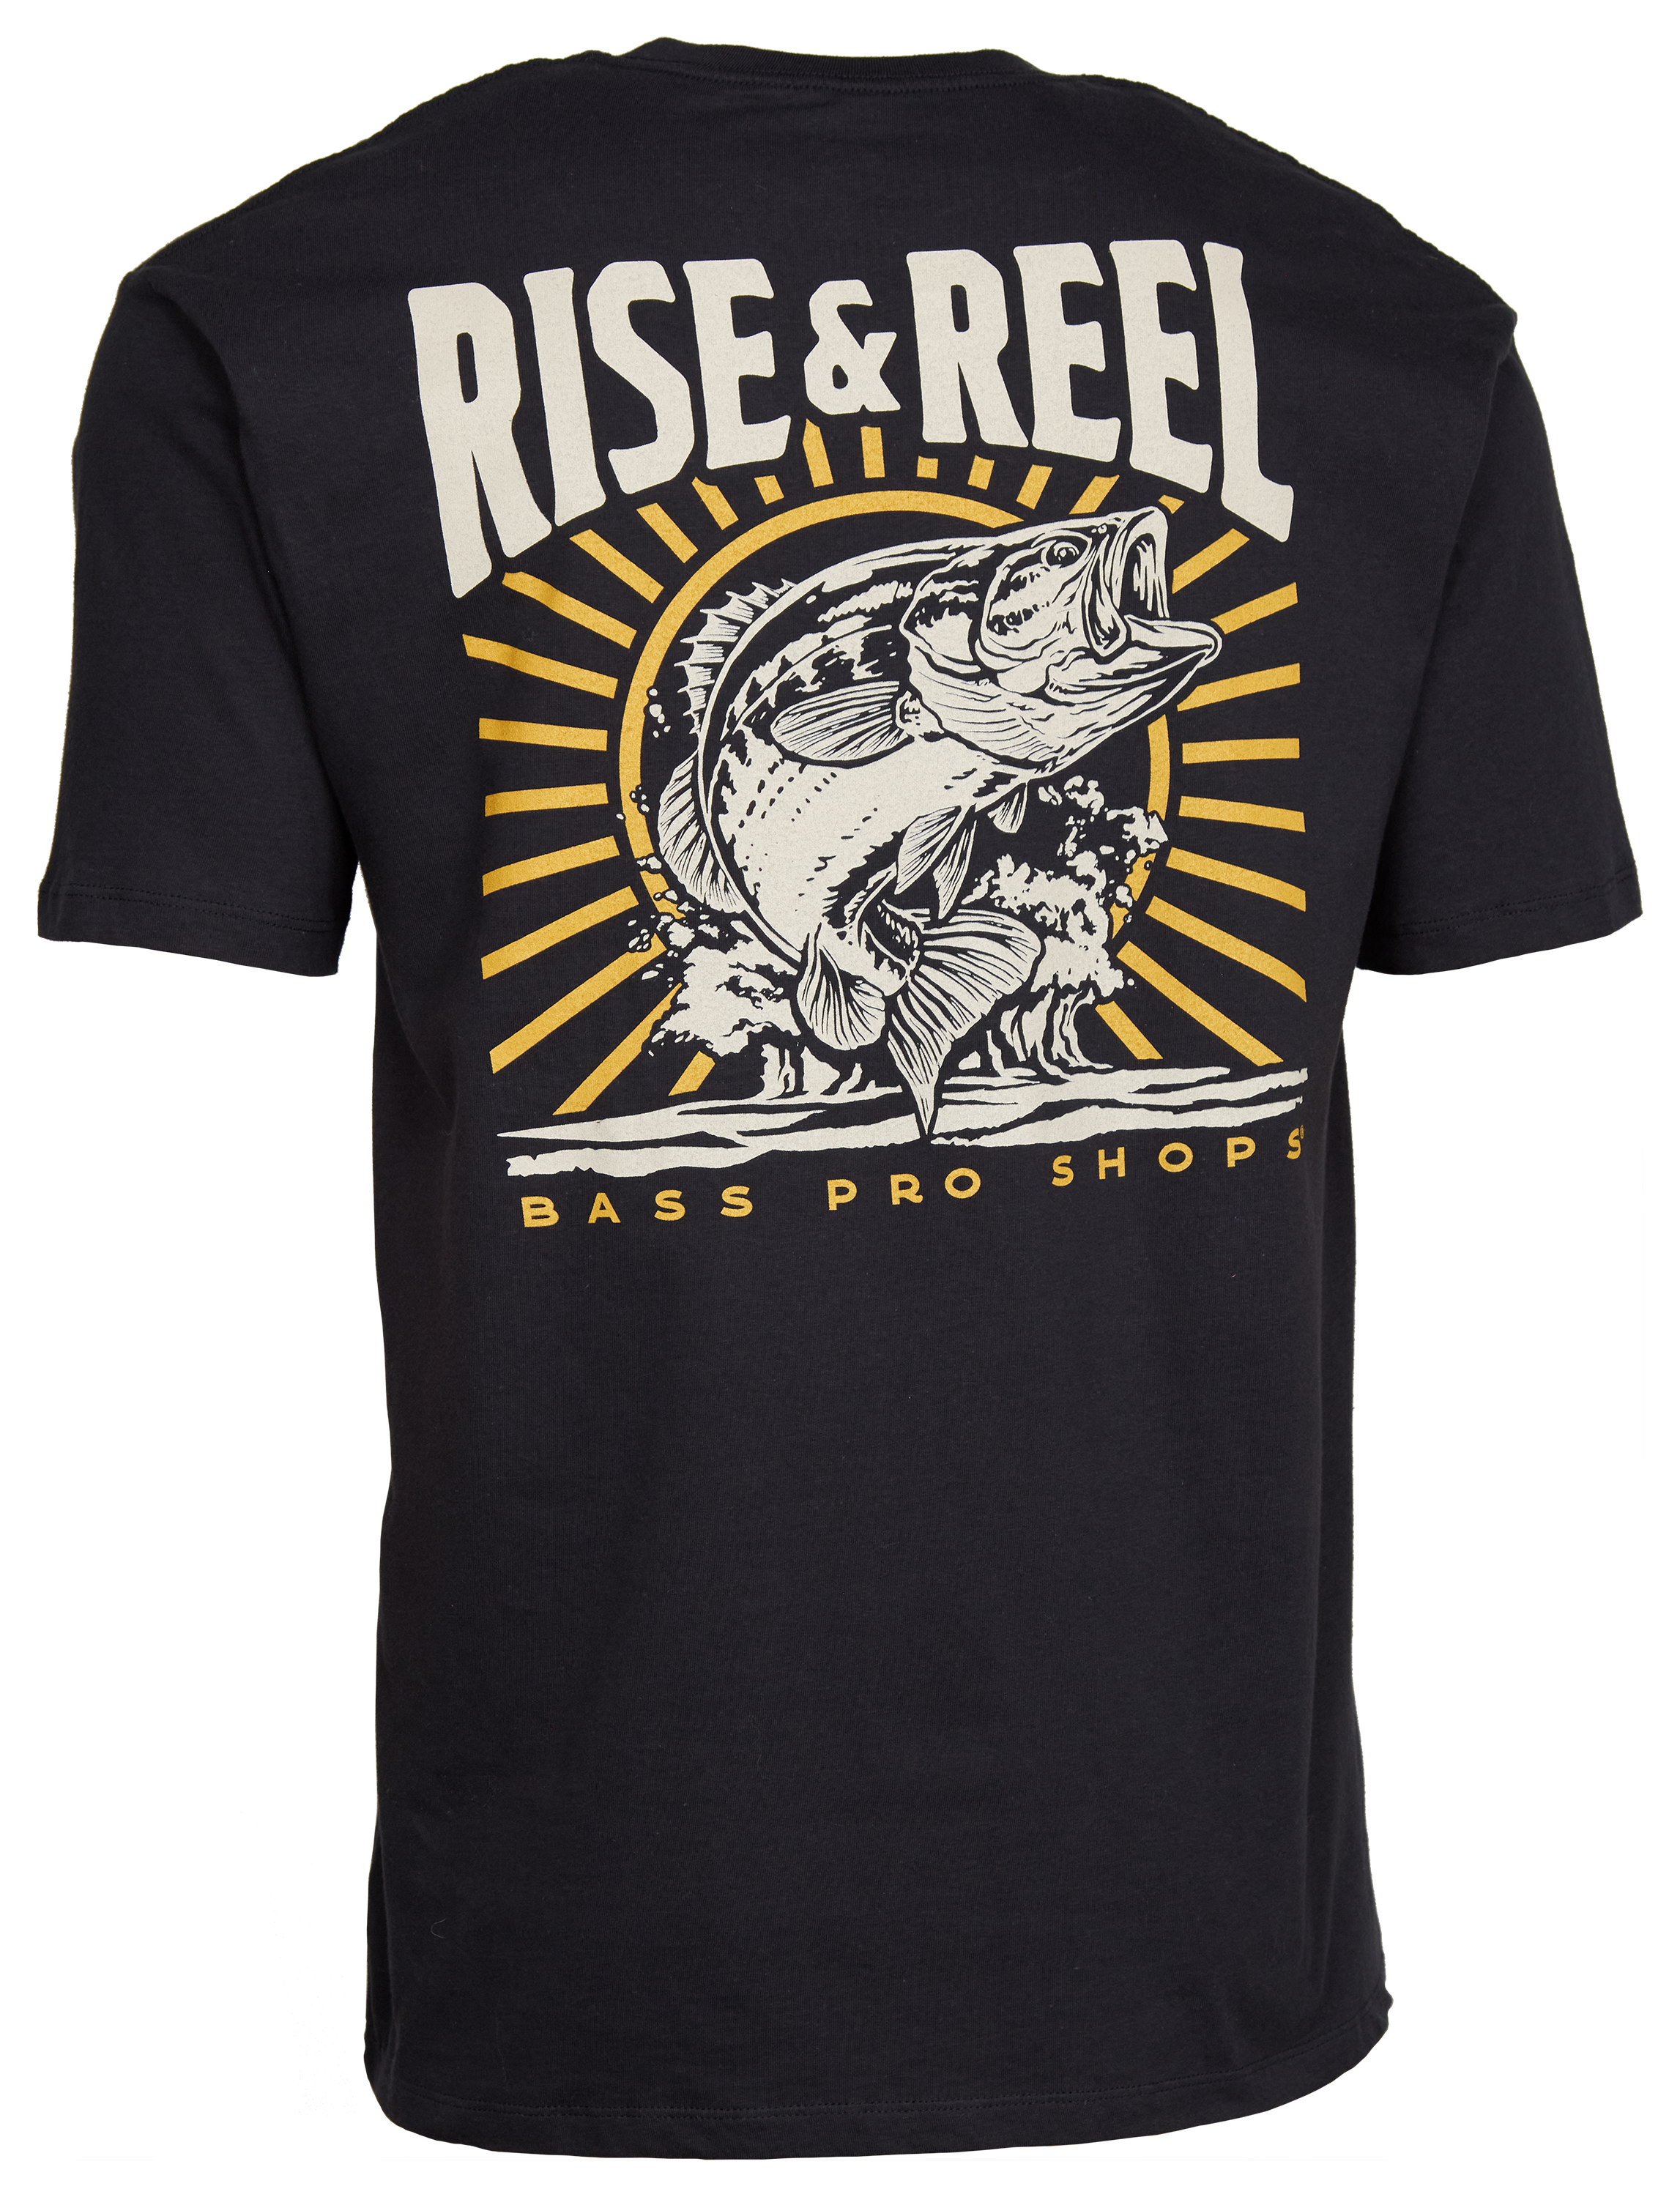 Bass Pro Shops Rise and Reel Short-Sleeve T-Shirt for Men